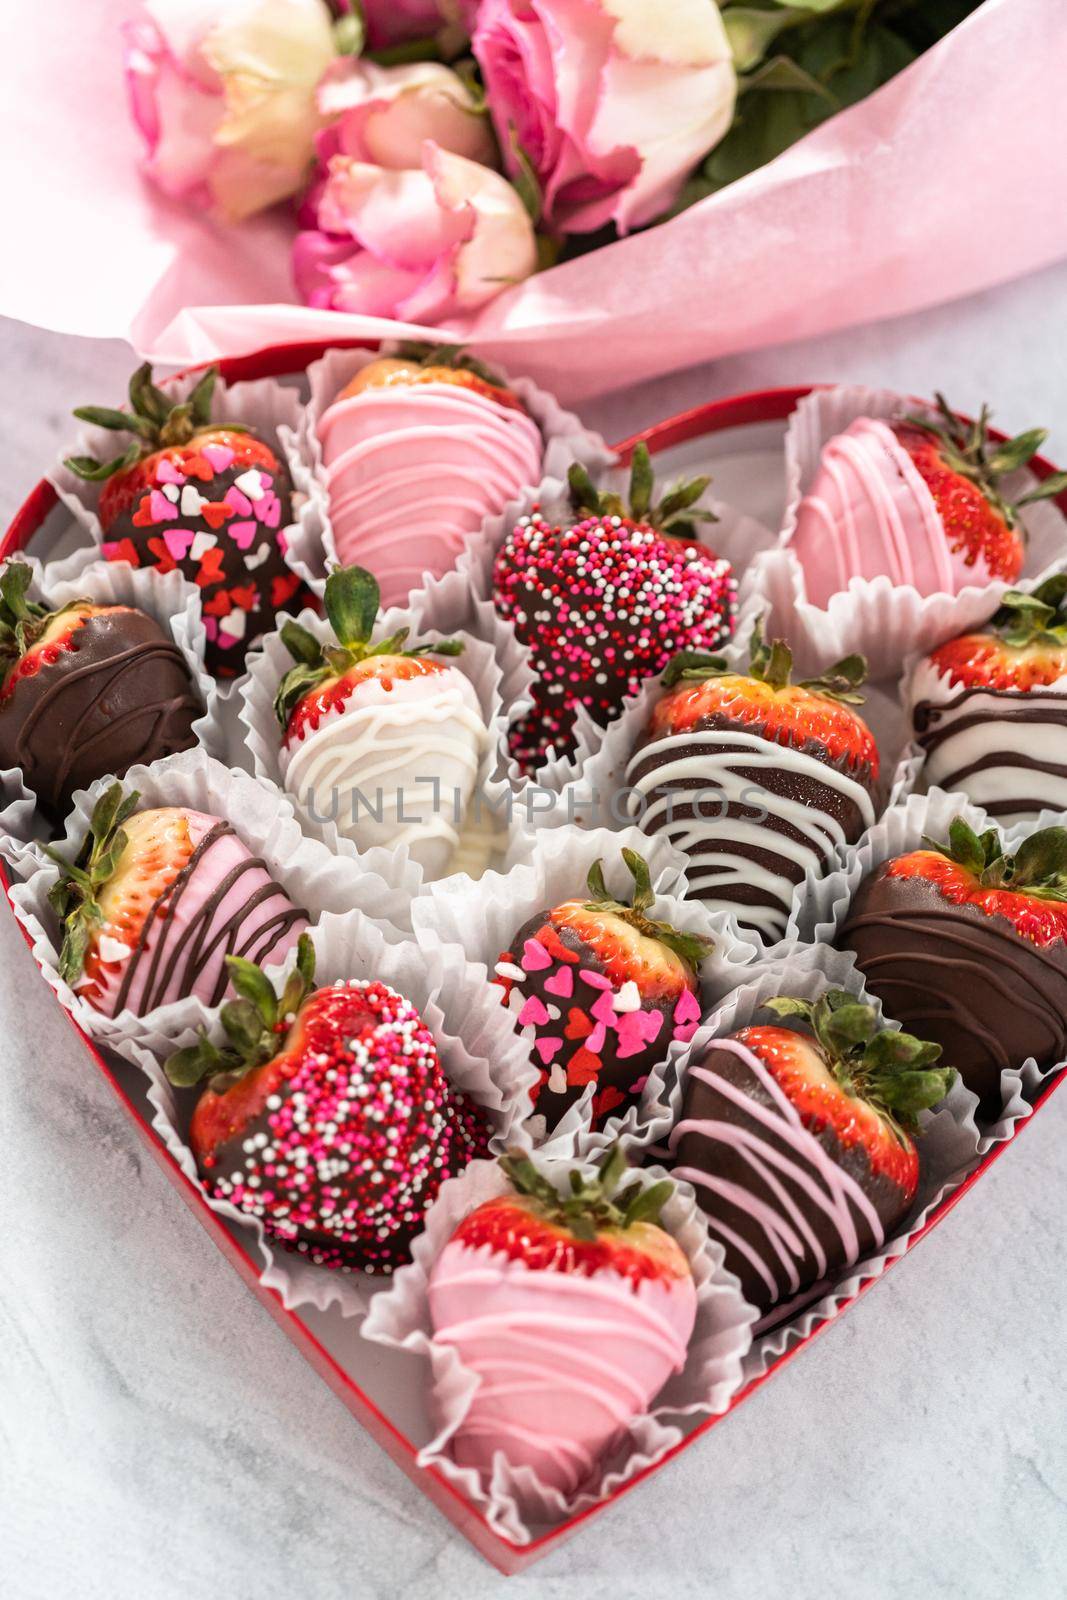 Heart shaped box with assorted chocolate covered strawberries on a white background.